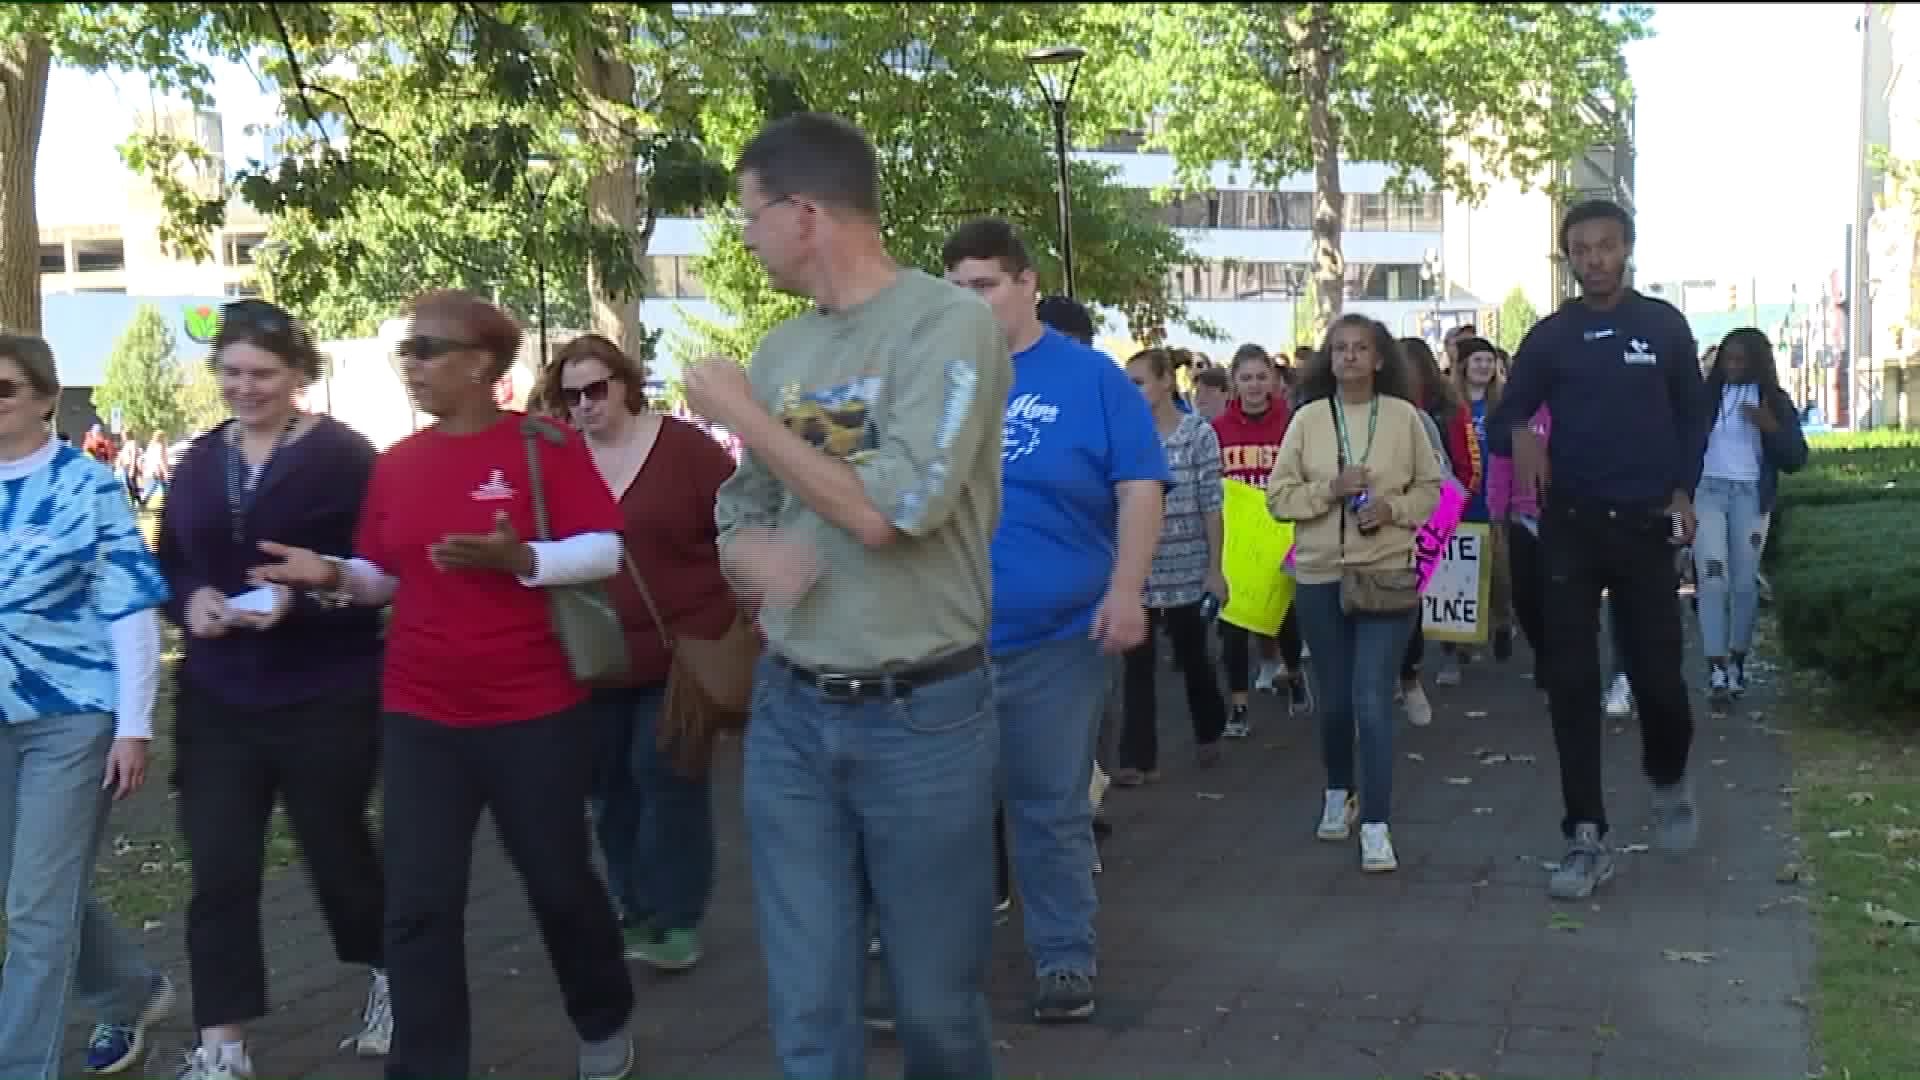 10th Annual Walk for Hope to Help Homeless Women